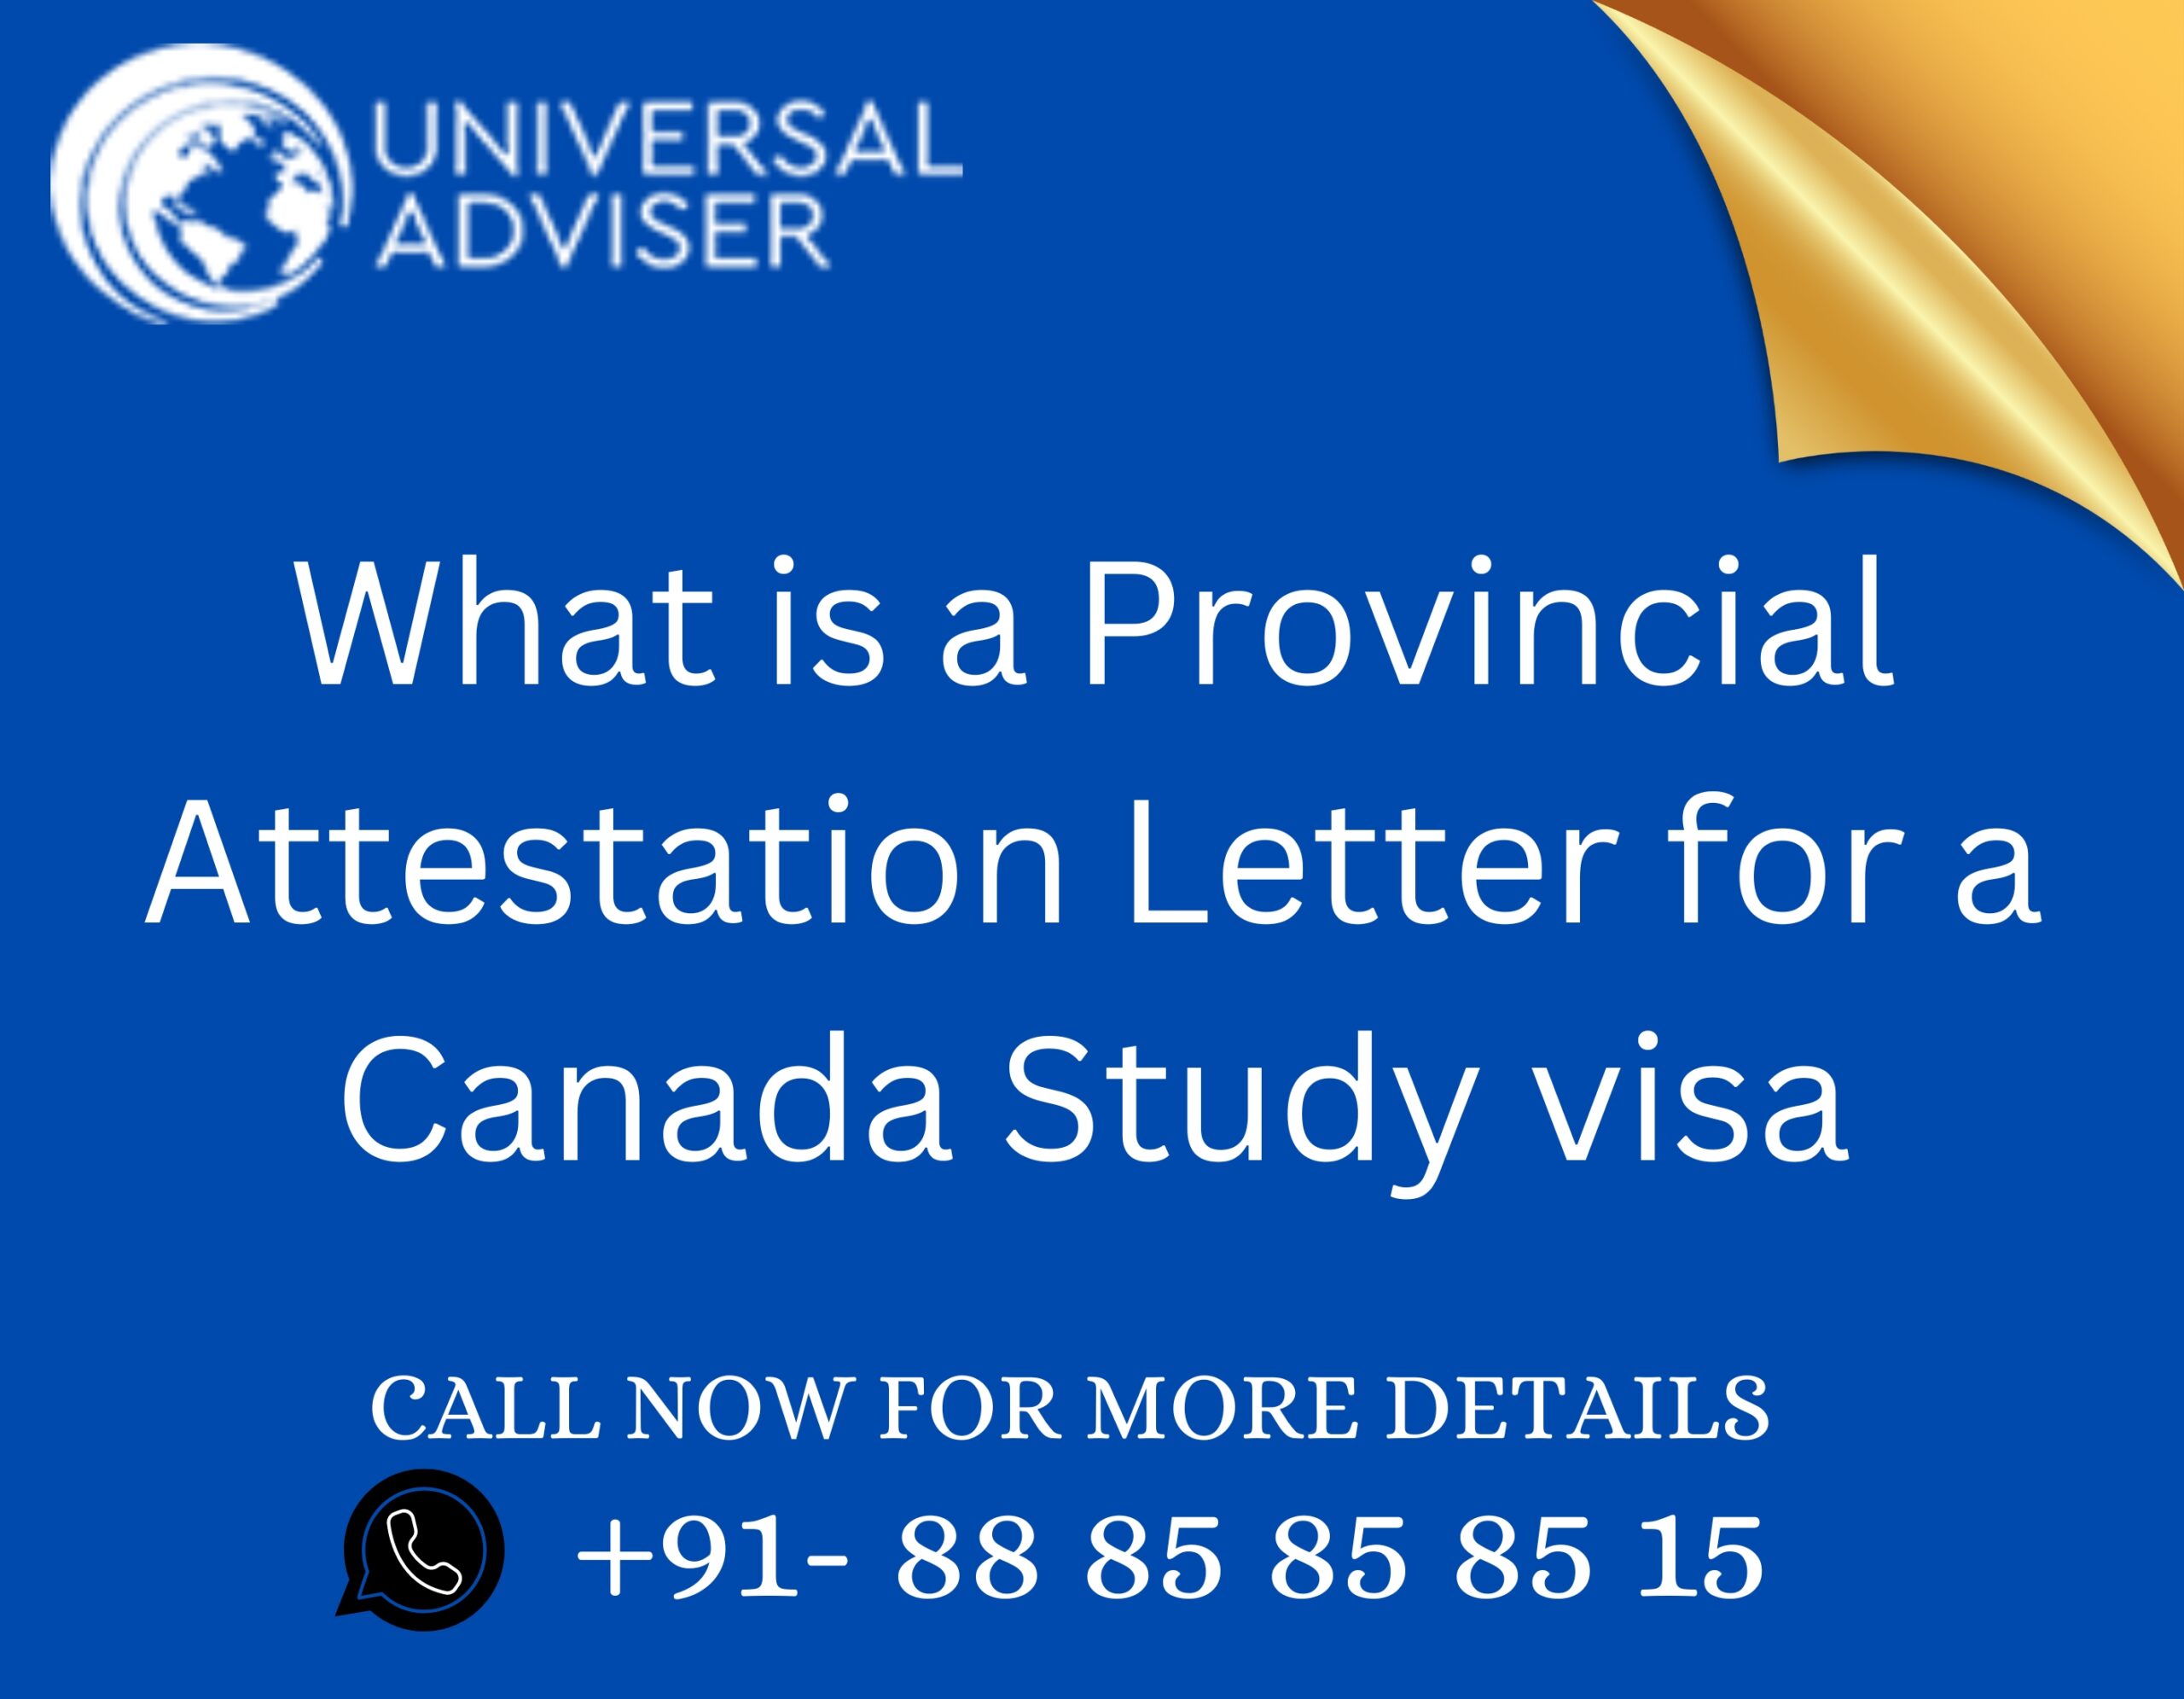 What is a Provincial Attestation Letter for a Canada Study visa